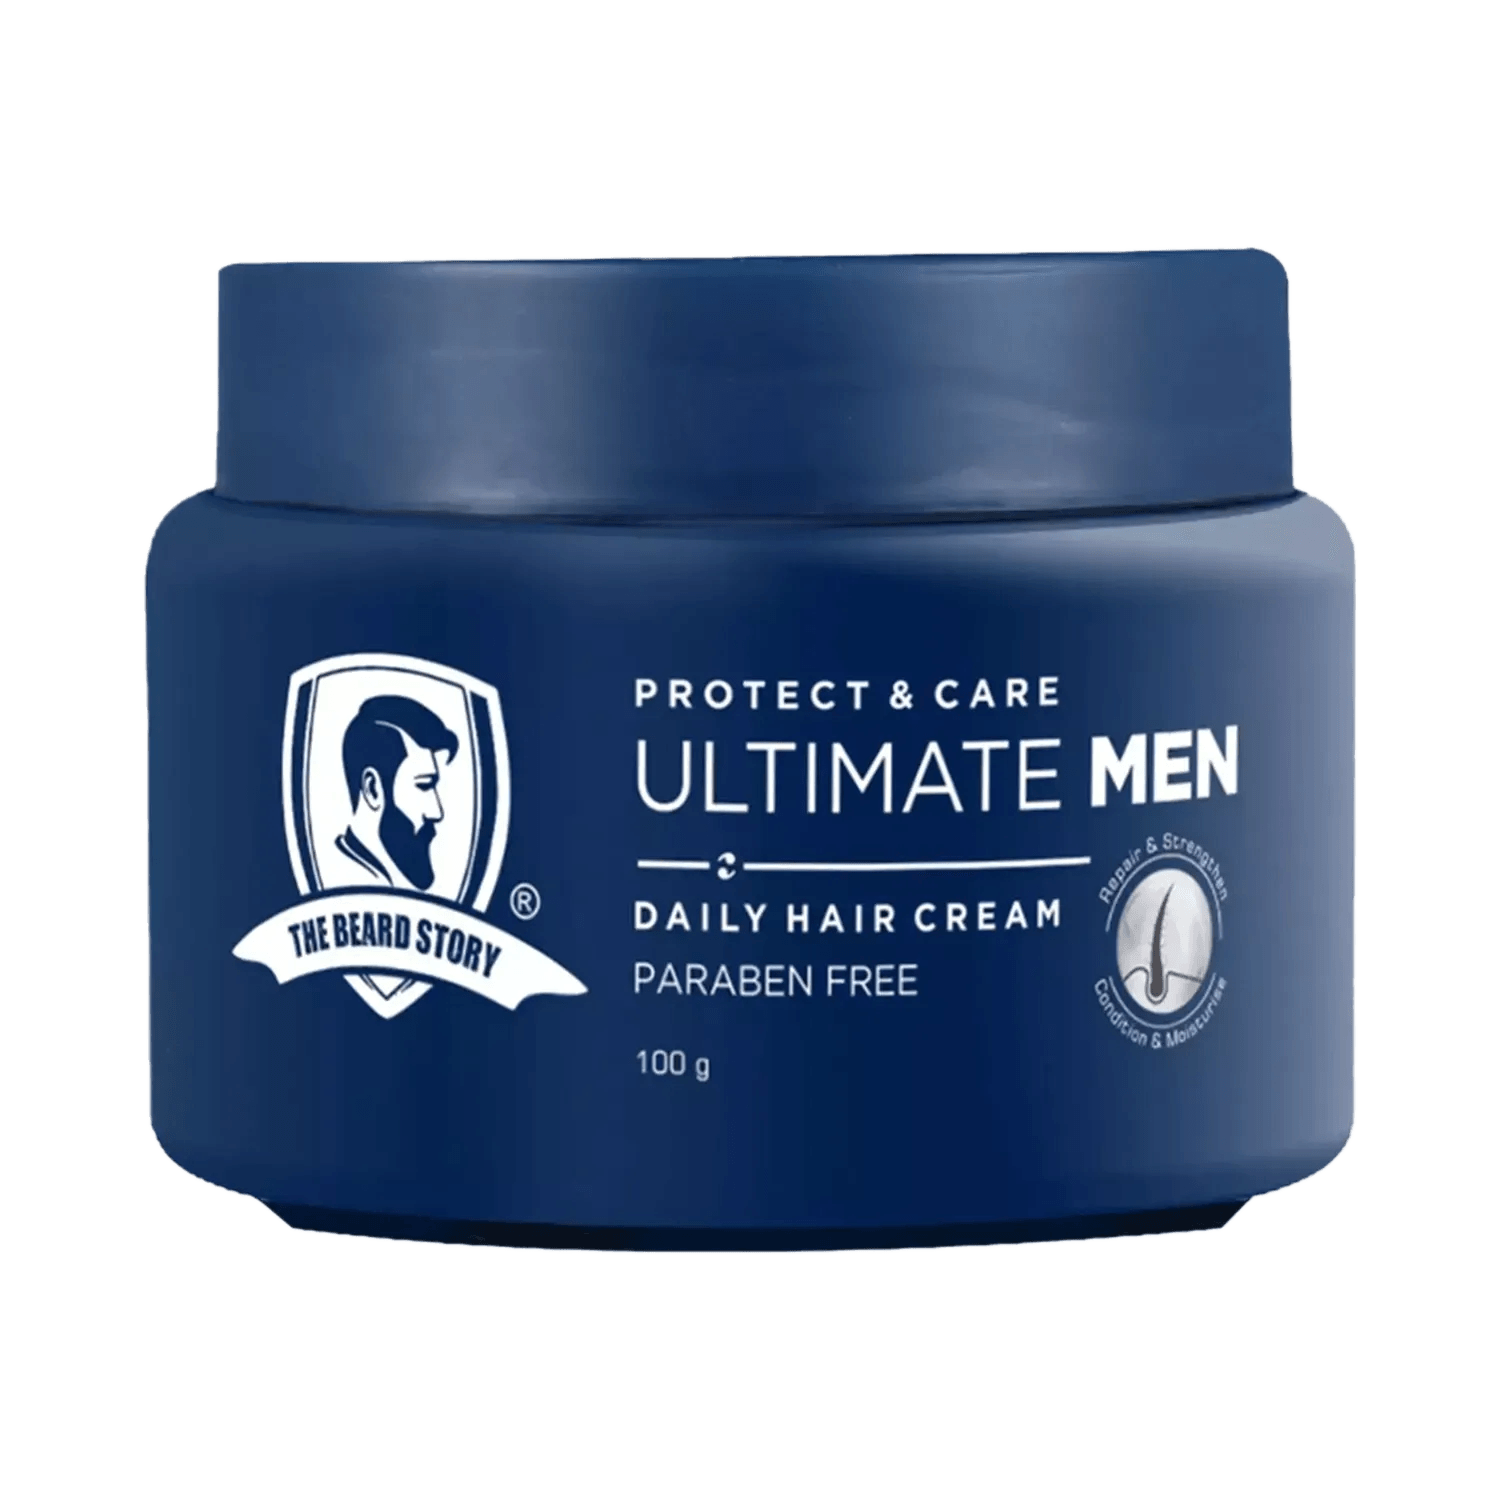 The Beard Story | The Beard Story Protect & Care Ultimate Men Daily Hair Cream (100gm)